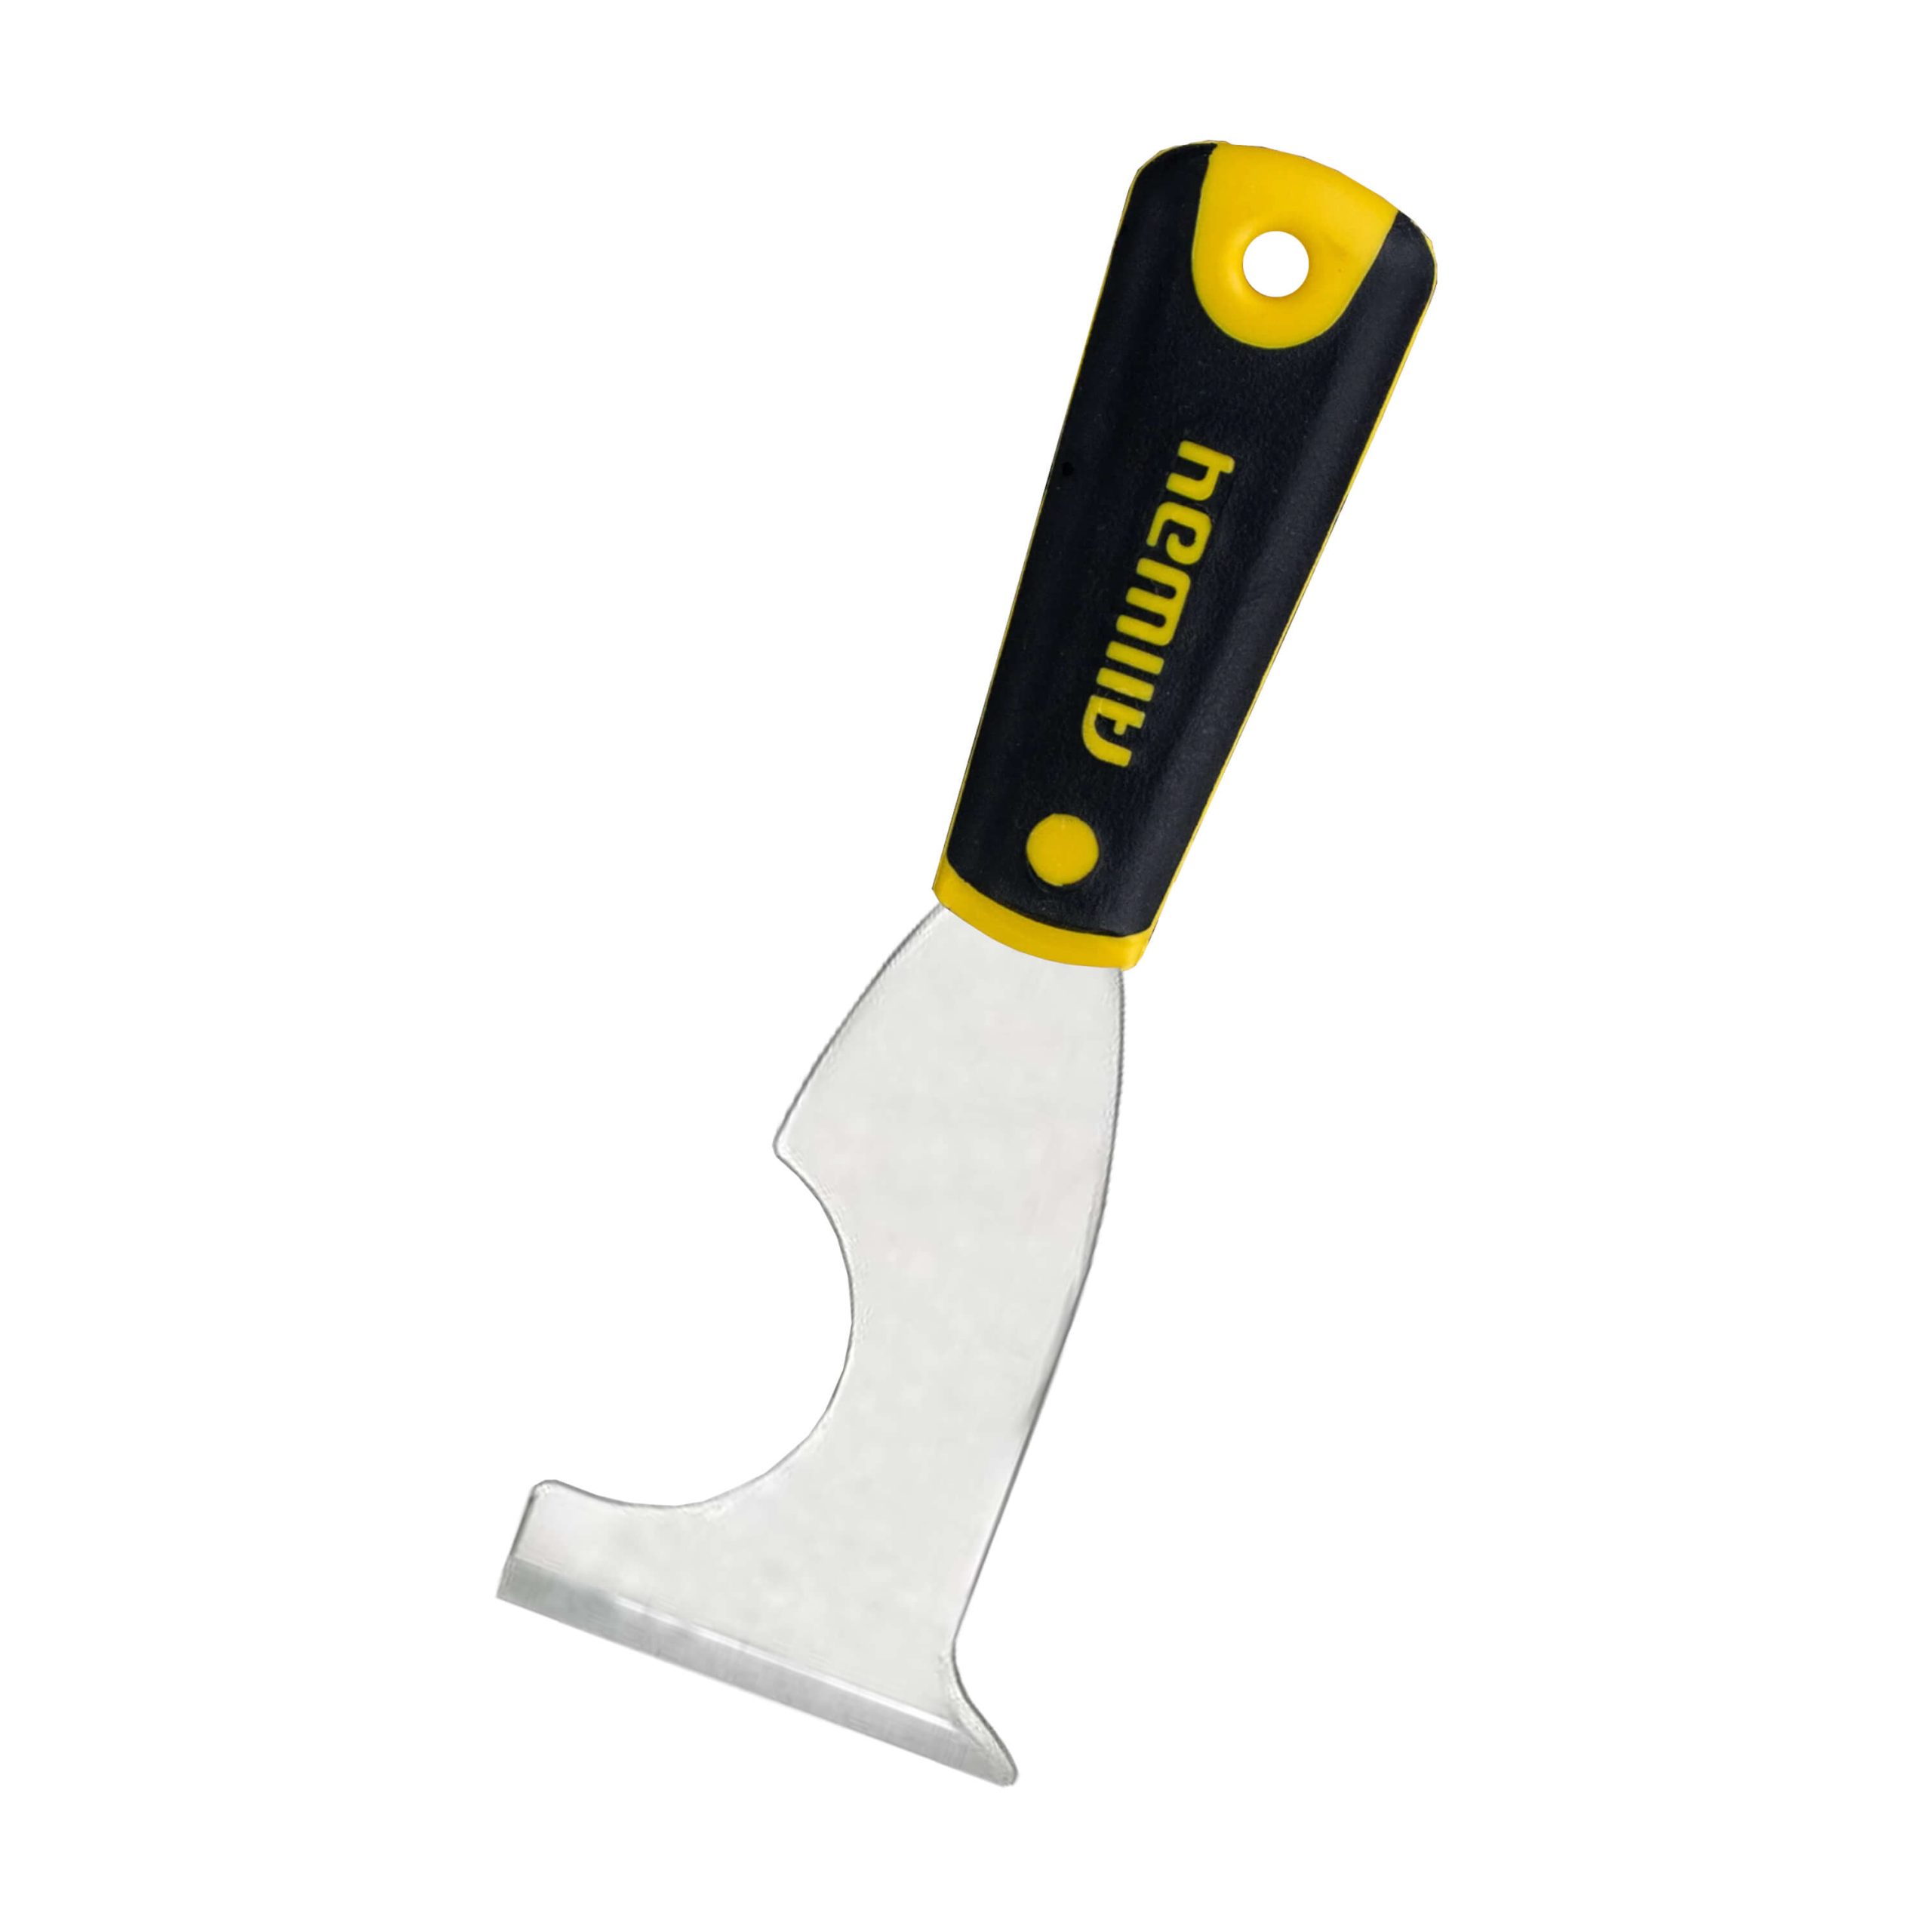 SG1) 5-in-1 Soft Grip Painter's Multi-Tool, Promo Line, Labelled » ALLWAY®  The Tools You Ask For By Name